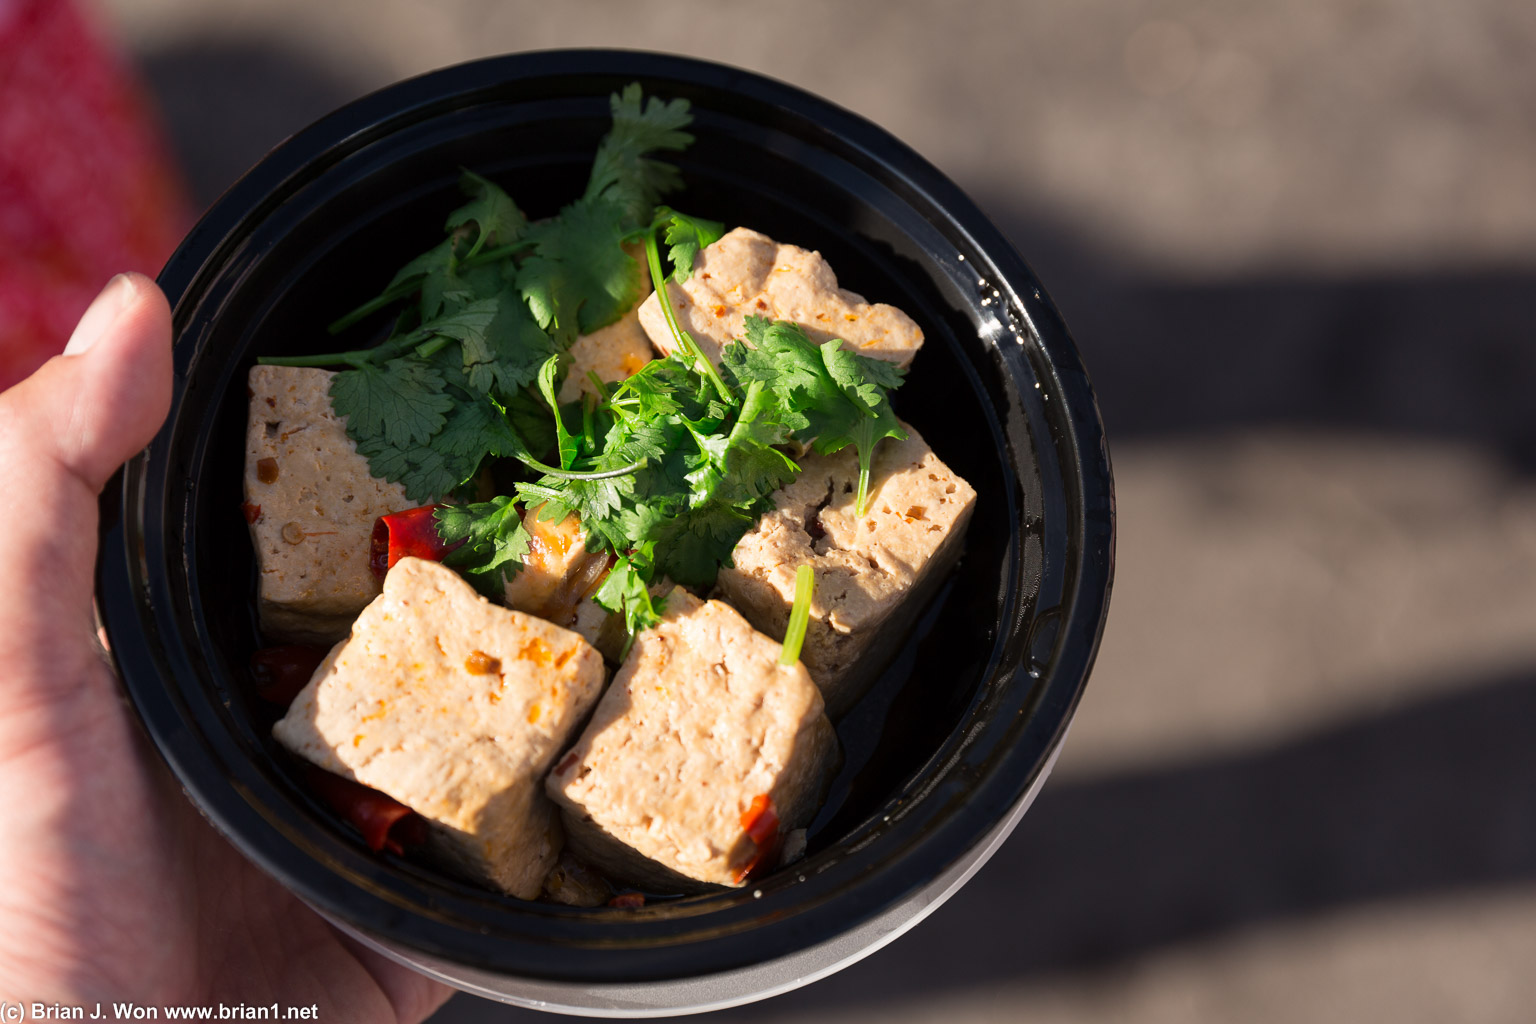 Delicious stinky tofu, a bit spicy, from Green Cube Tofu. Took 20 minutes to boil!